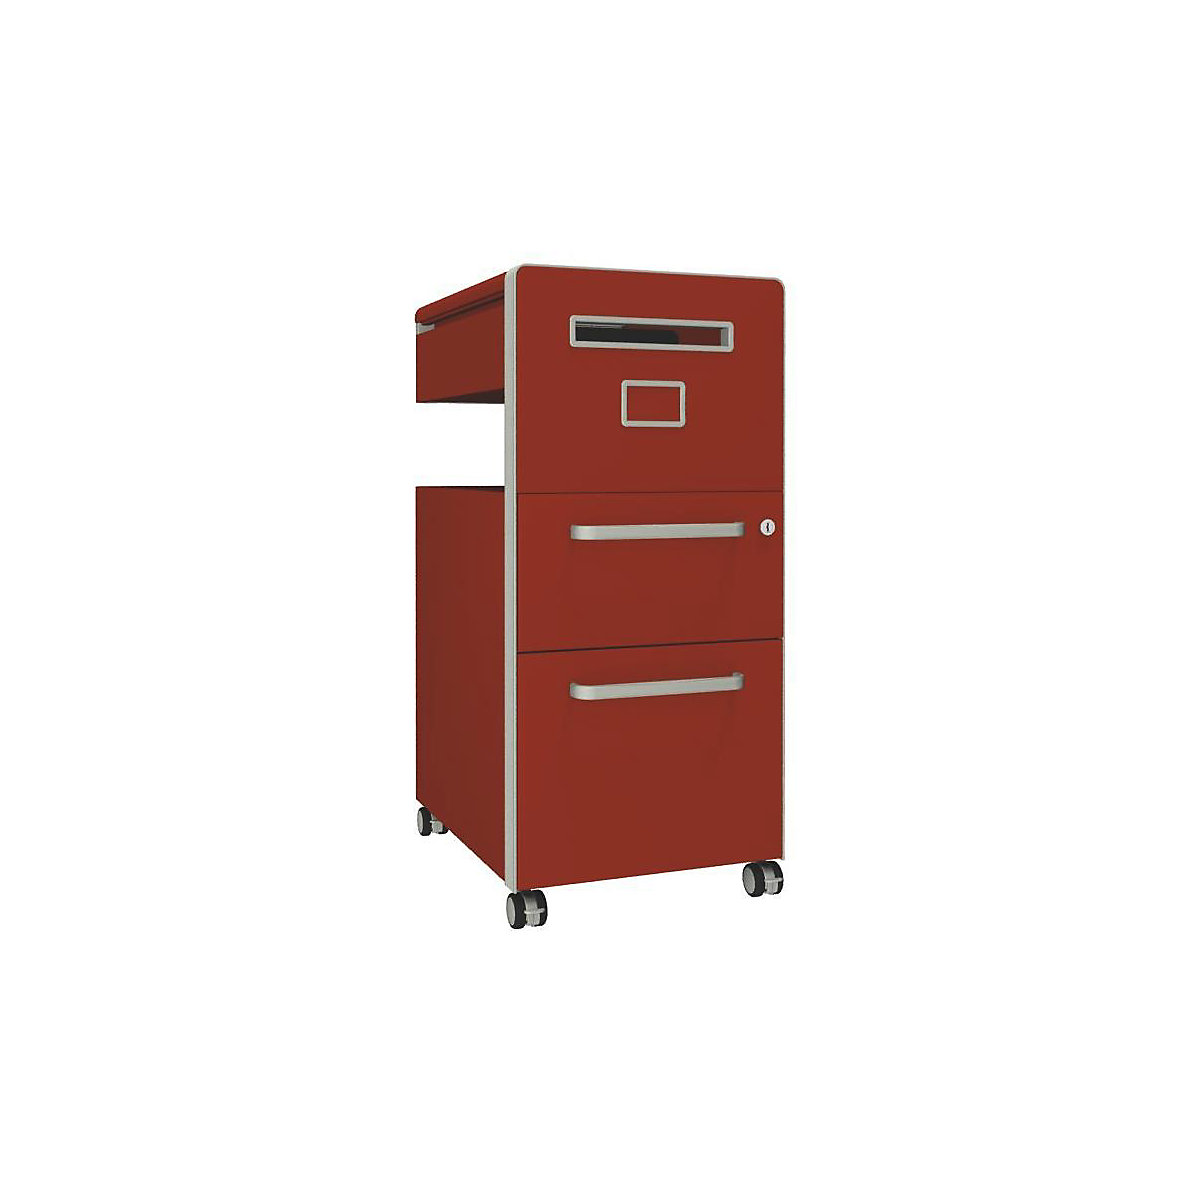 Bite™ pedestal furniture, with 1 whiteboard, opens on the right side – BISLEY, with 1 universal drawer, 1 suspension file drawer, sevilla-9